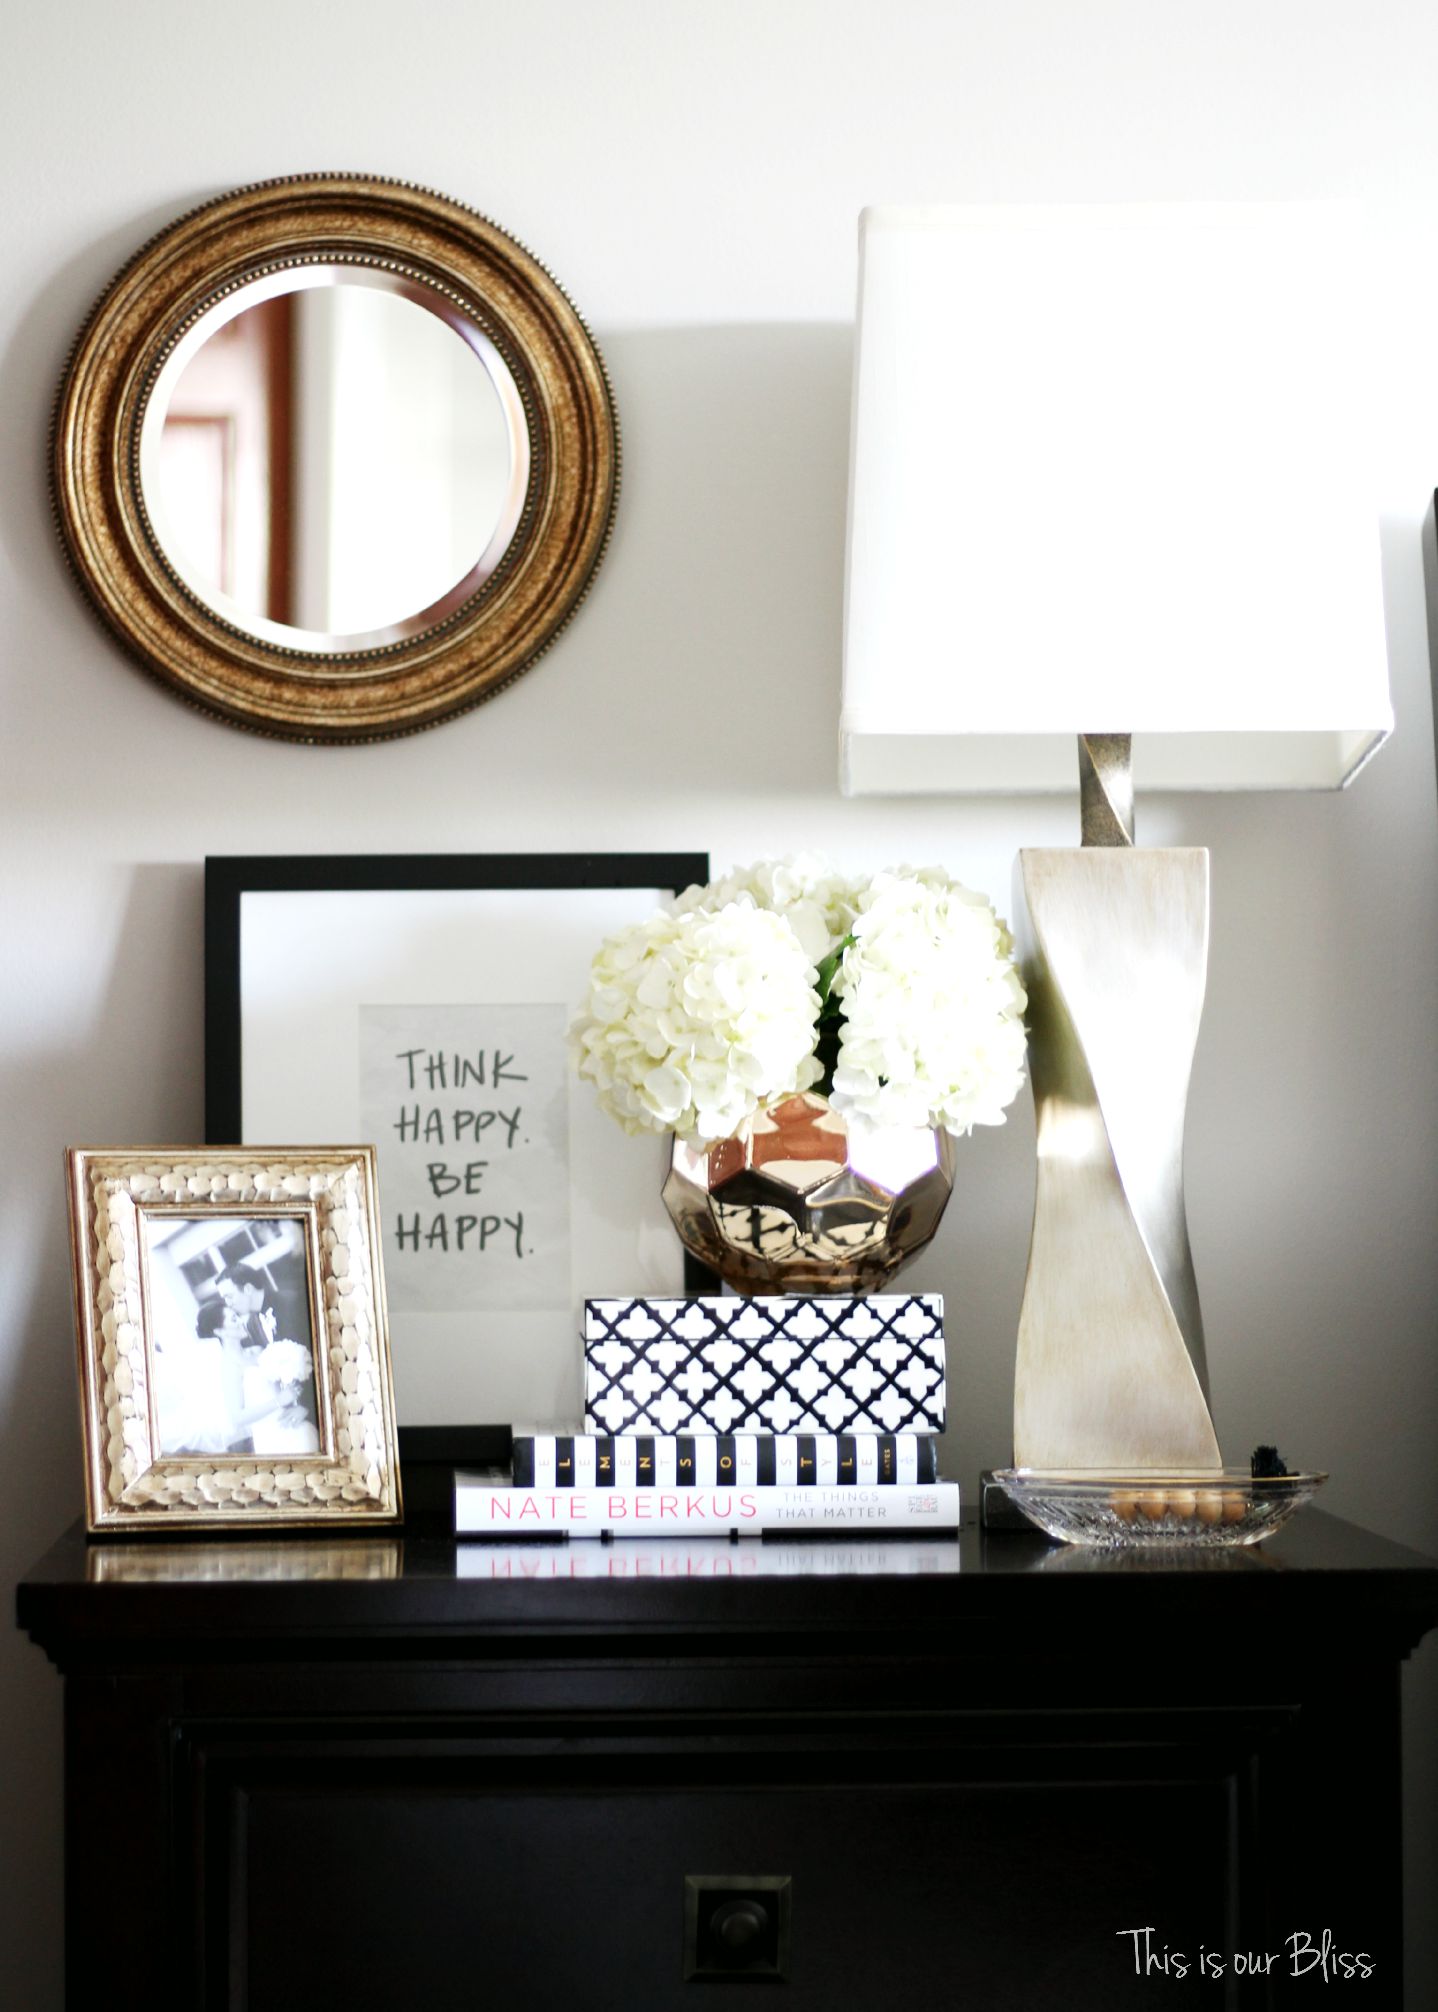 how to style a nightstand - back to basics - bedside table styling - bedoroom decor - This is our Bliss